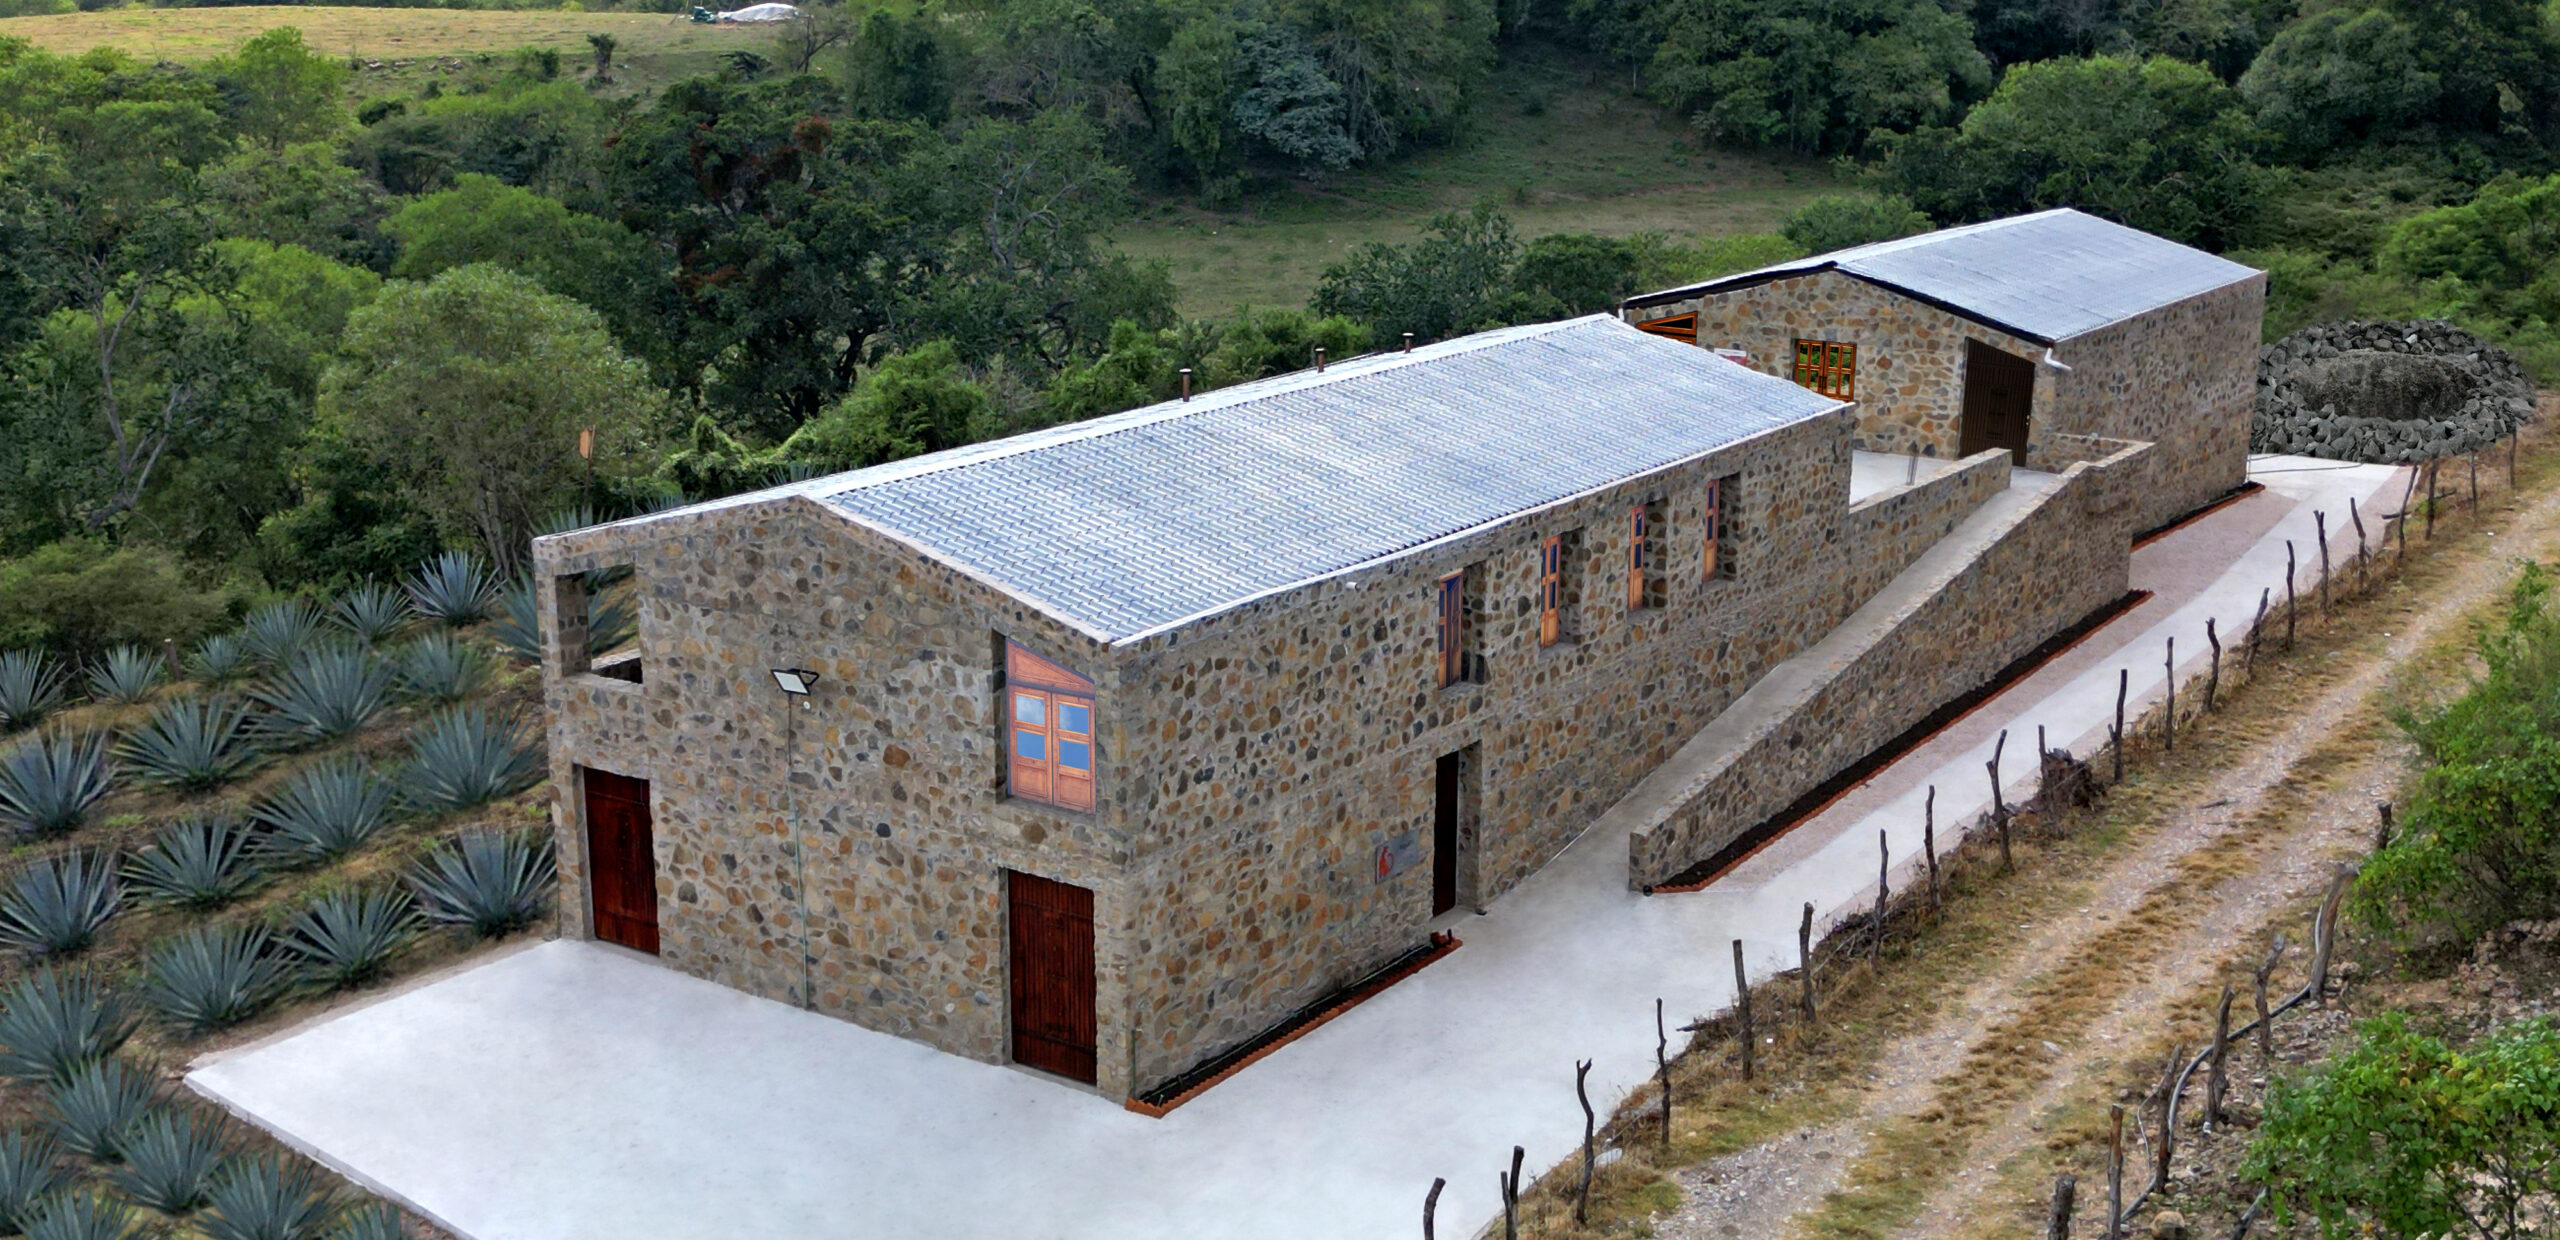 A building with stone walls and a metal roof.